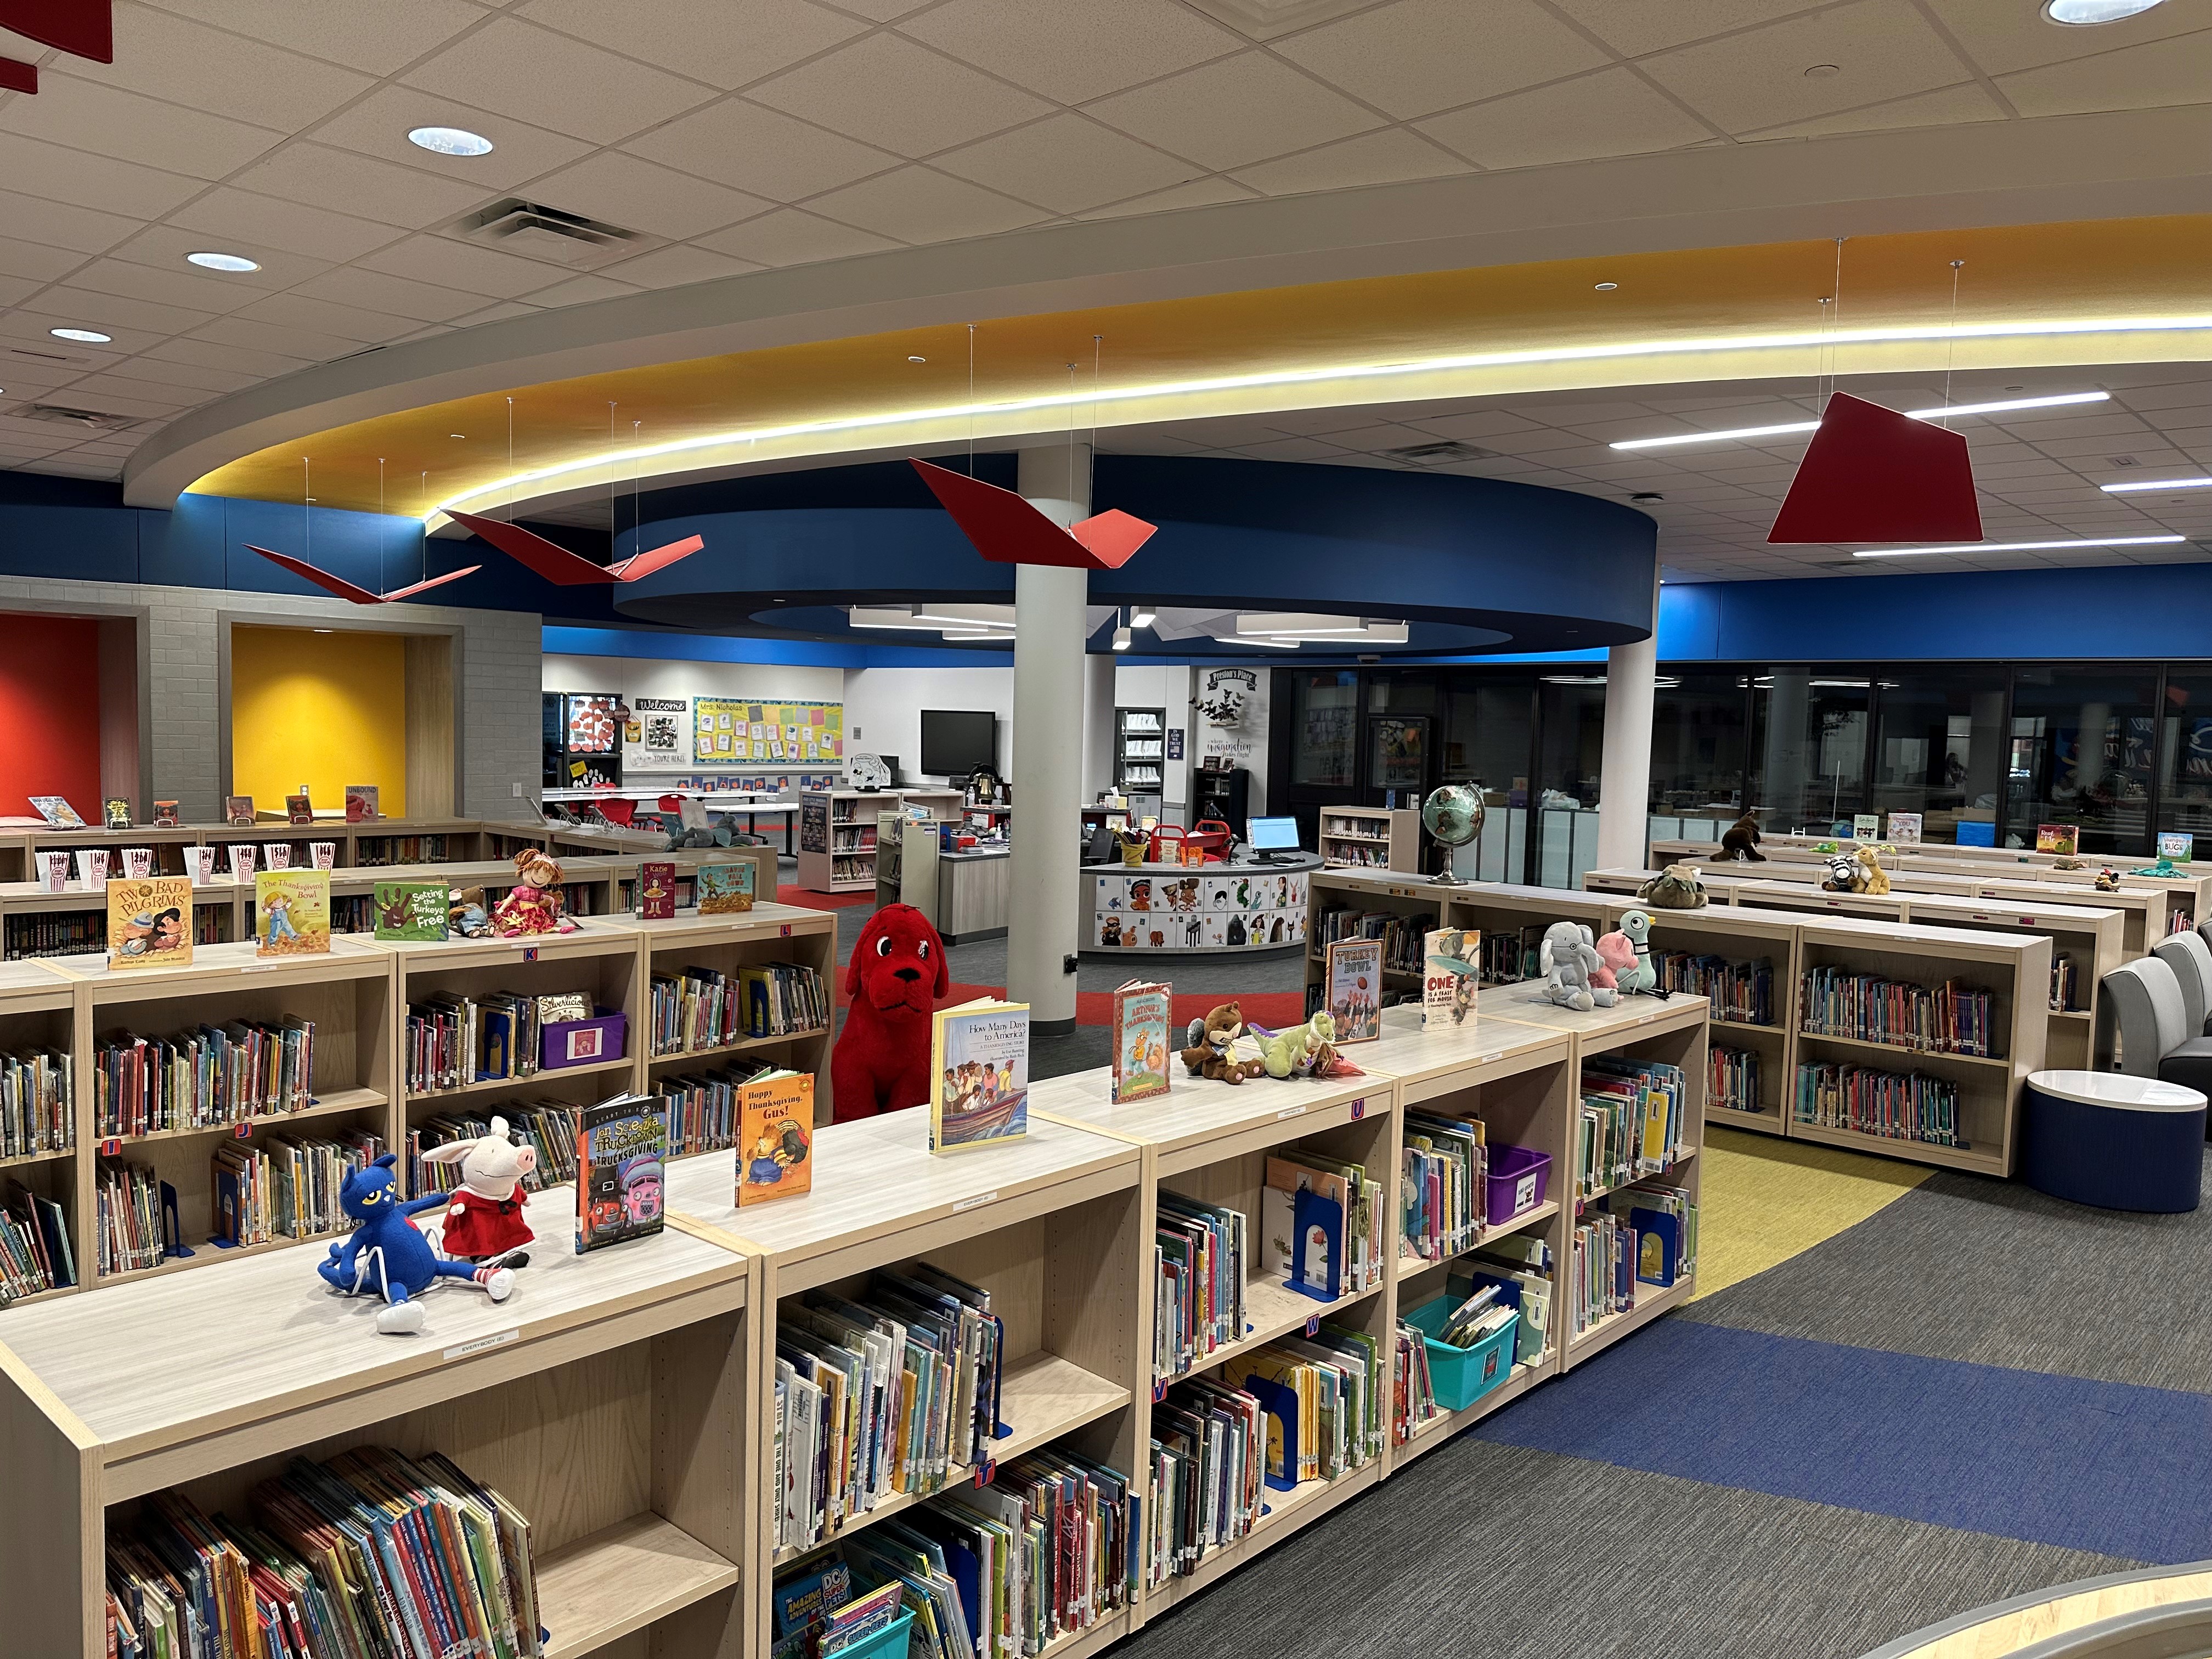 Boon Elementary Library